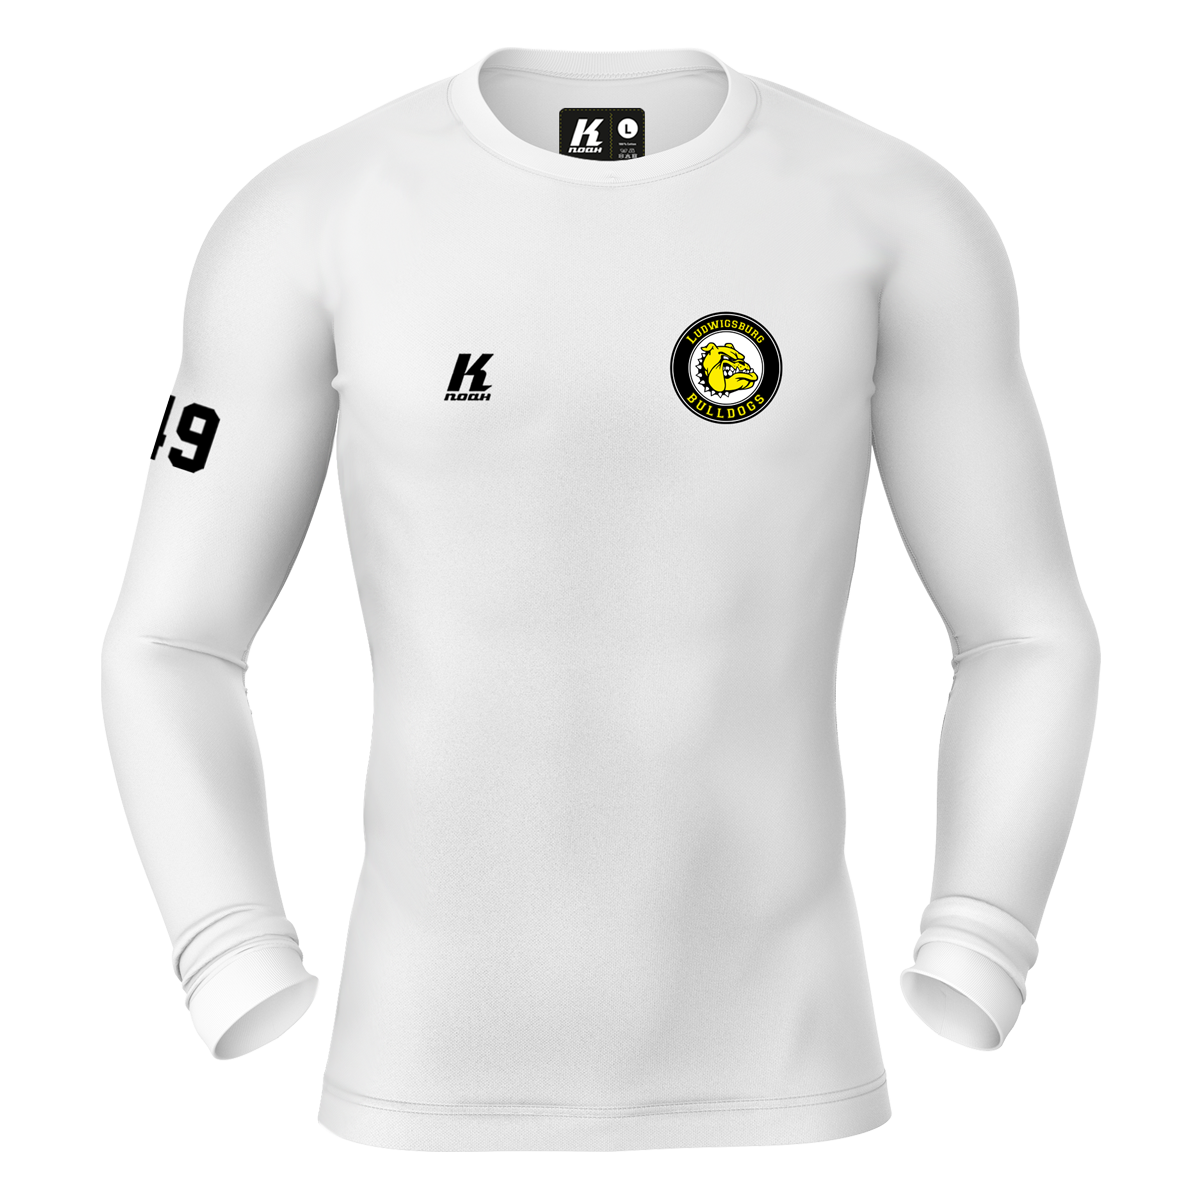 LB-Bulldogs K.Tech Compression Longsleeve Shirt white with Playernumber/Initials